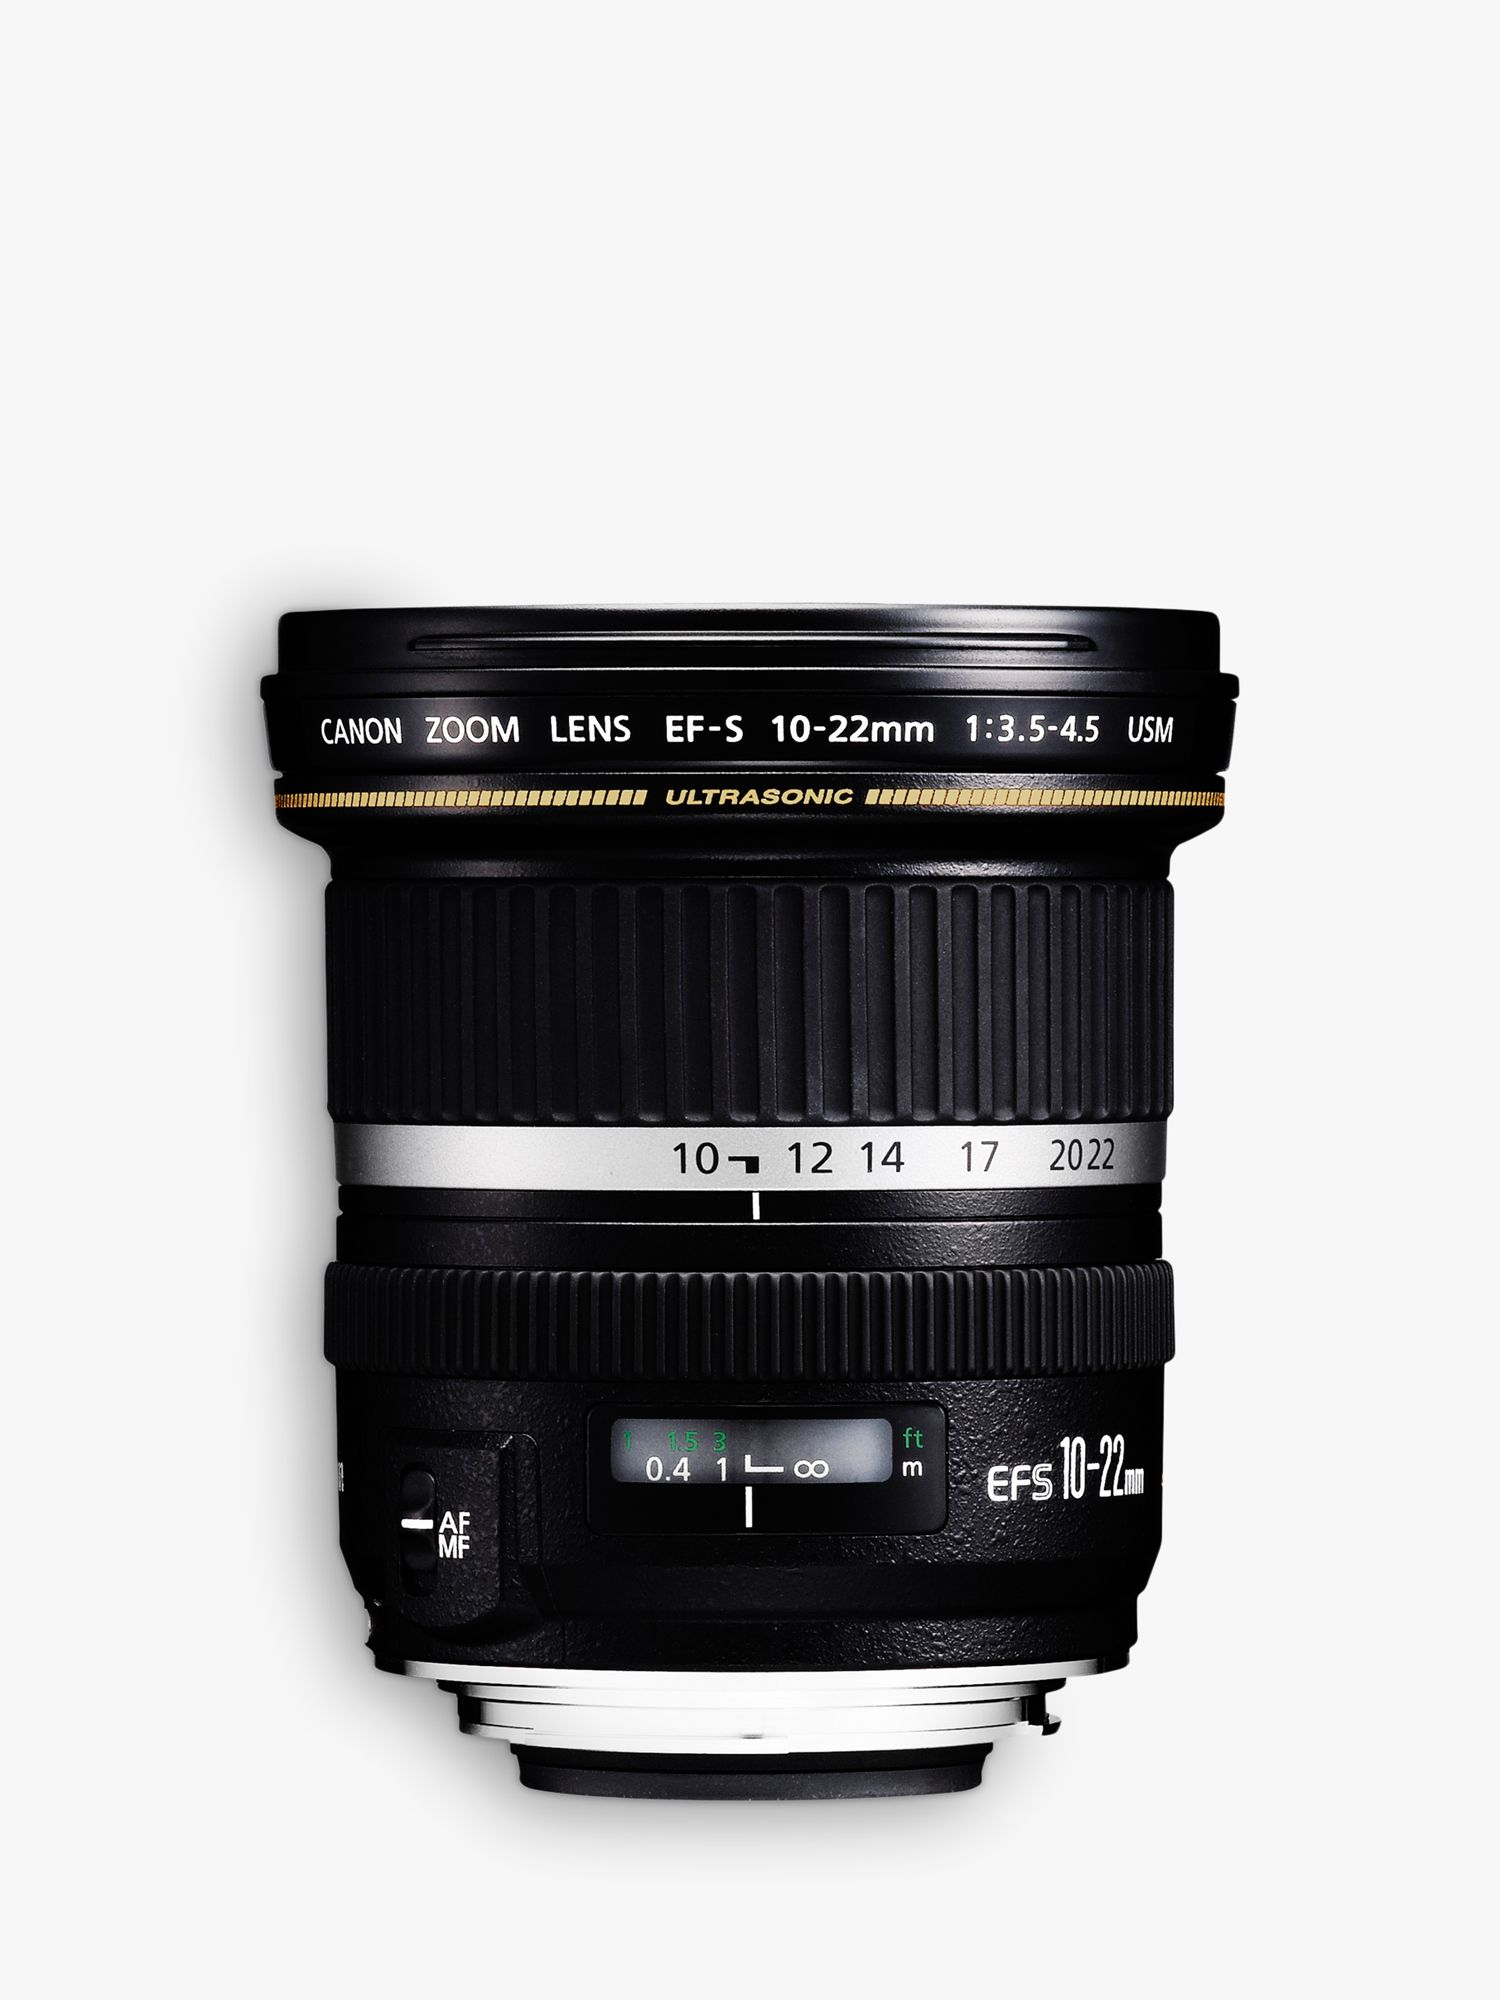 Canon EF-S 10-22mm f/3.5-4.5 USM Wide Angle Lens at John Lewis & Partners